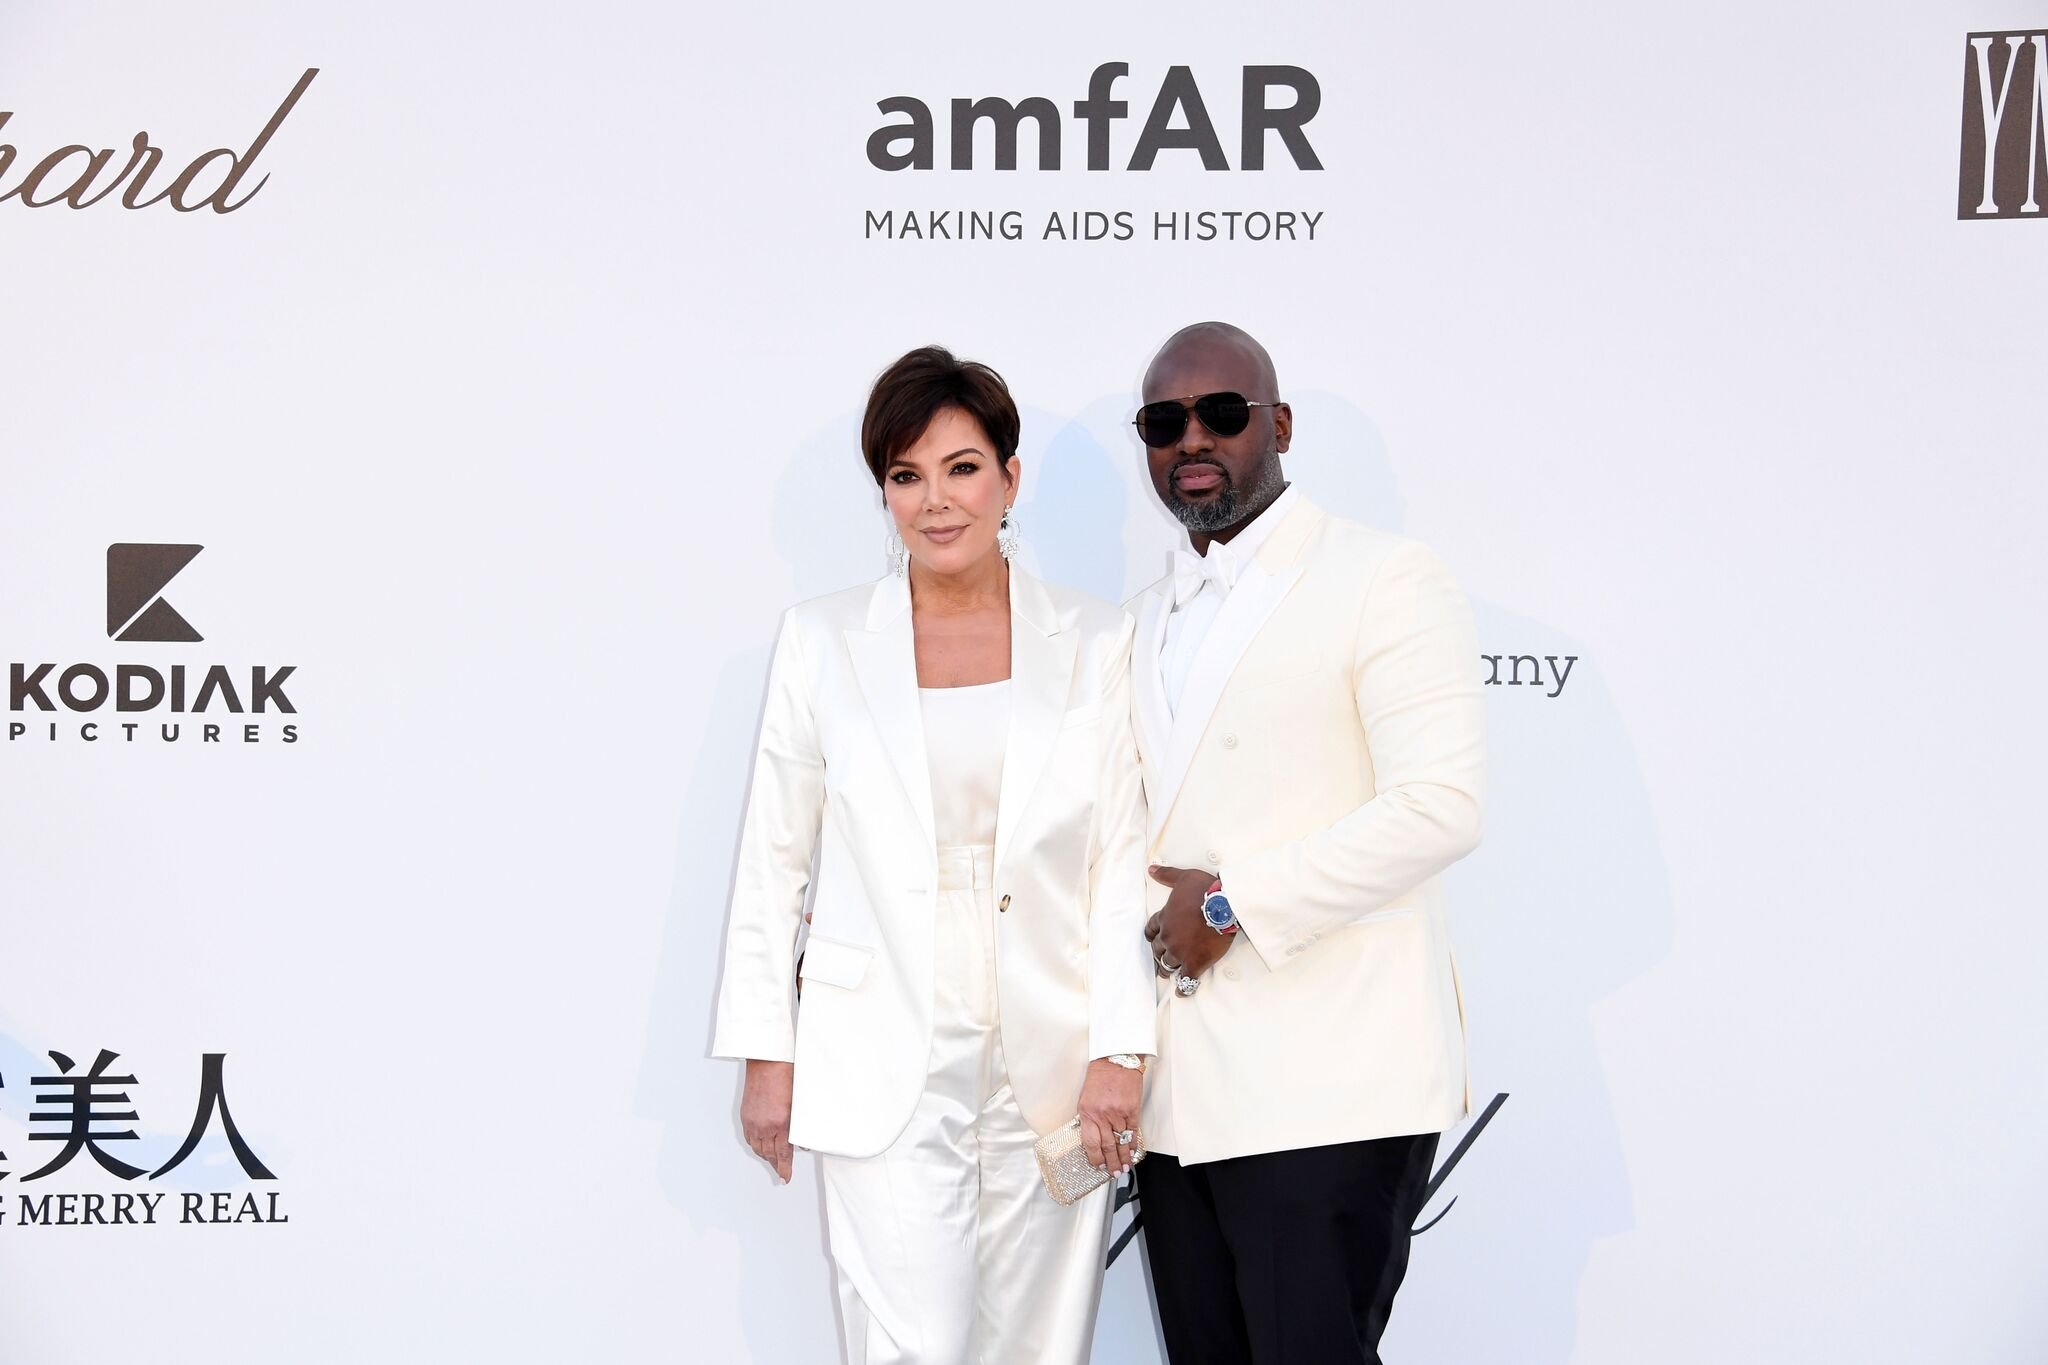 Kris Jenner and boyfriend Corey Gamble wearing matching white outfits at the 2019 amfAR Cannes Gala. I Image: Getty Images.